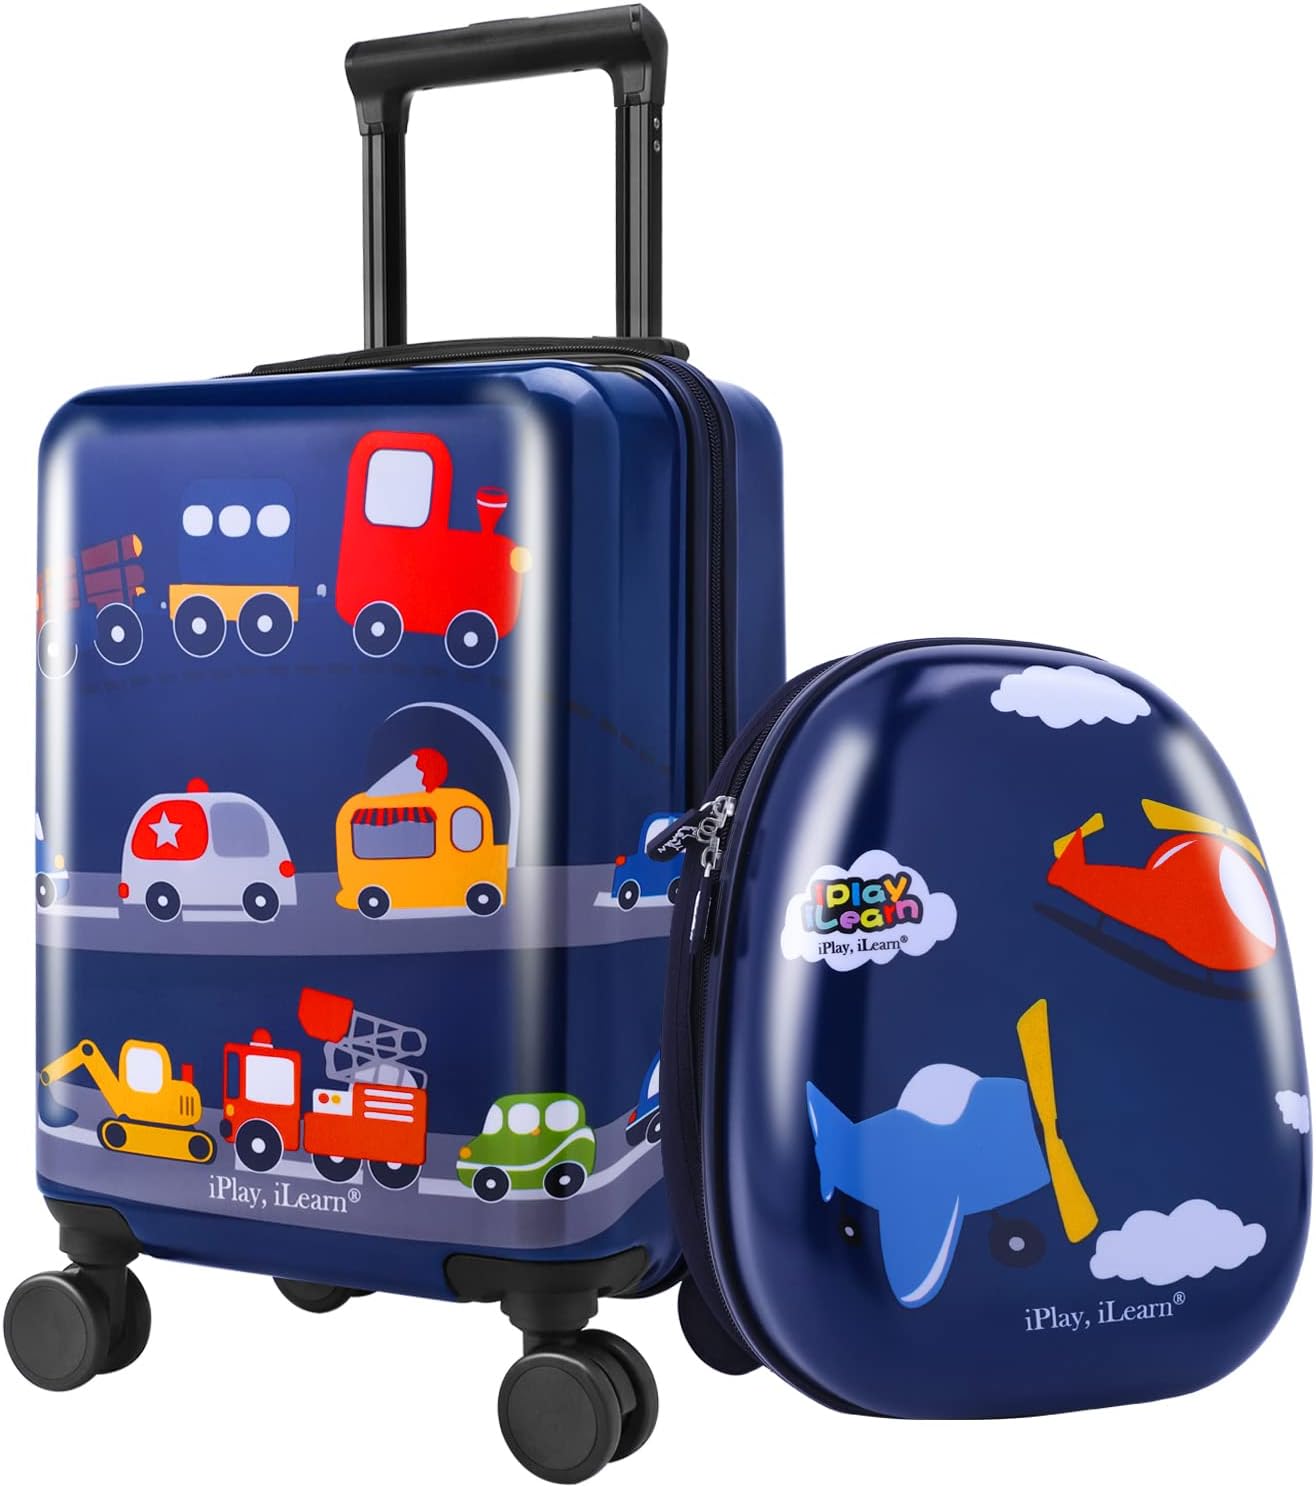 iPlay, iLearn Kids Carry On Luggage Set, 18 Hardside Rolling Suitcase W/Spinner Wheels, Hard Shell Travel Luggage W/Backpack for Boys Toddlers Children